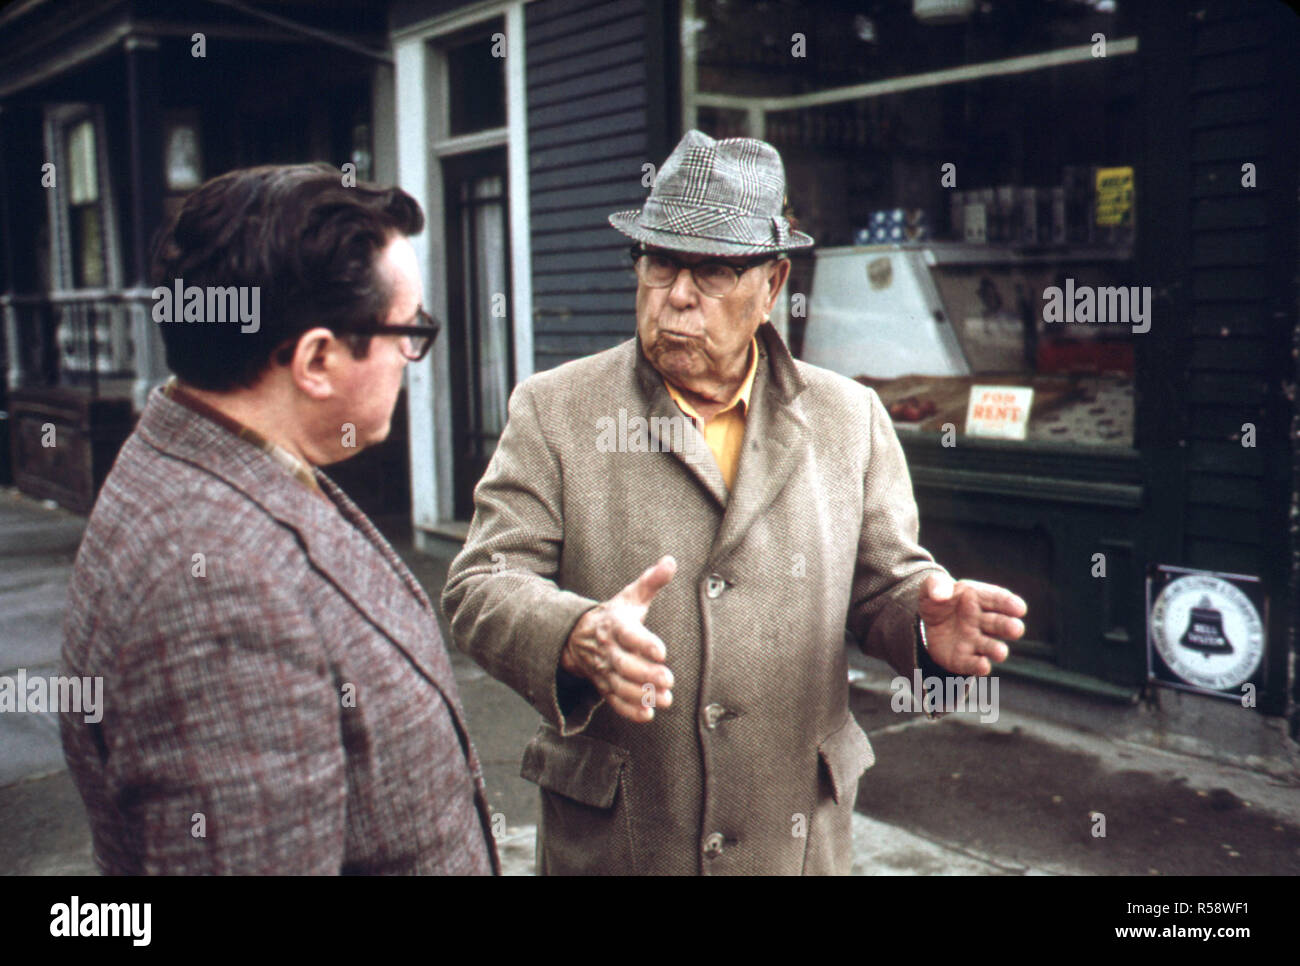 1973 Boston - A 92 Year Old man from Lovell Street Tells his neighbor of Nearby Neptune Road How Airplane Vibrations Twice Knocked Over His Telephone Stock Photo